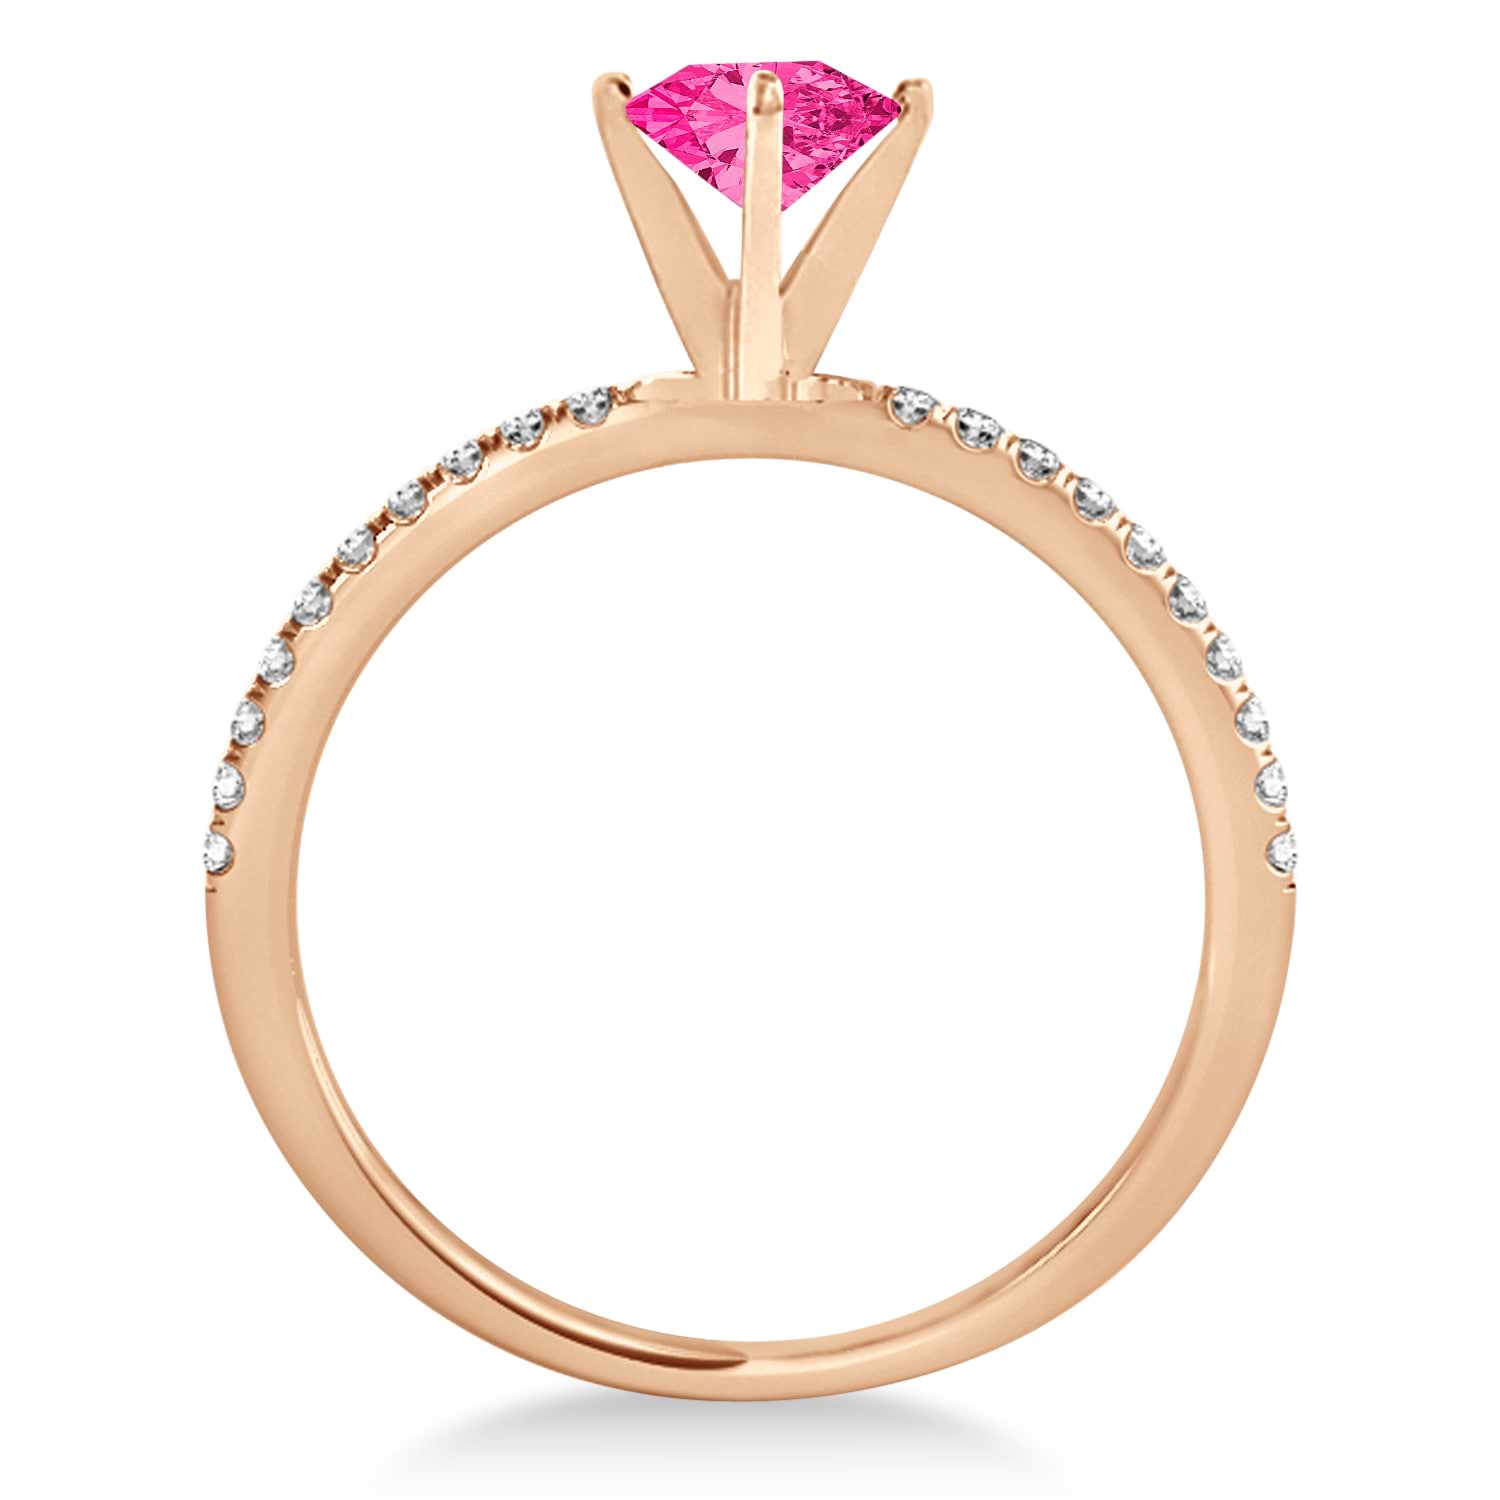 Pink Tourmaline & Diamond Accented Oval Shape Engagement Ring 18k Rose Gold (2.50ct)